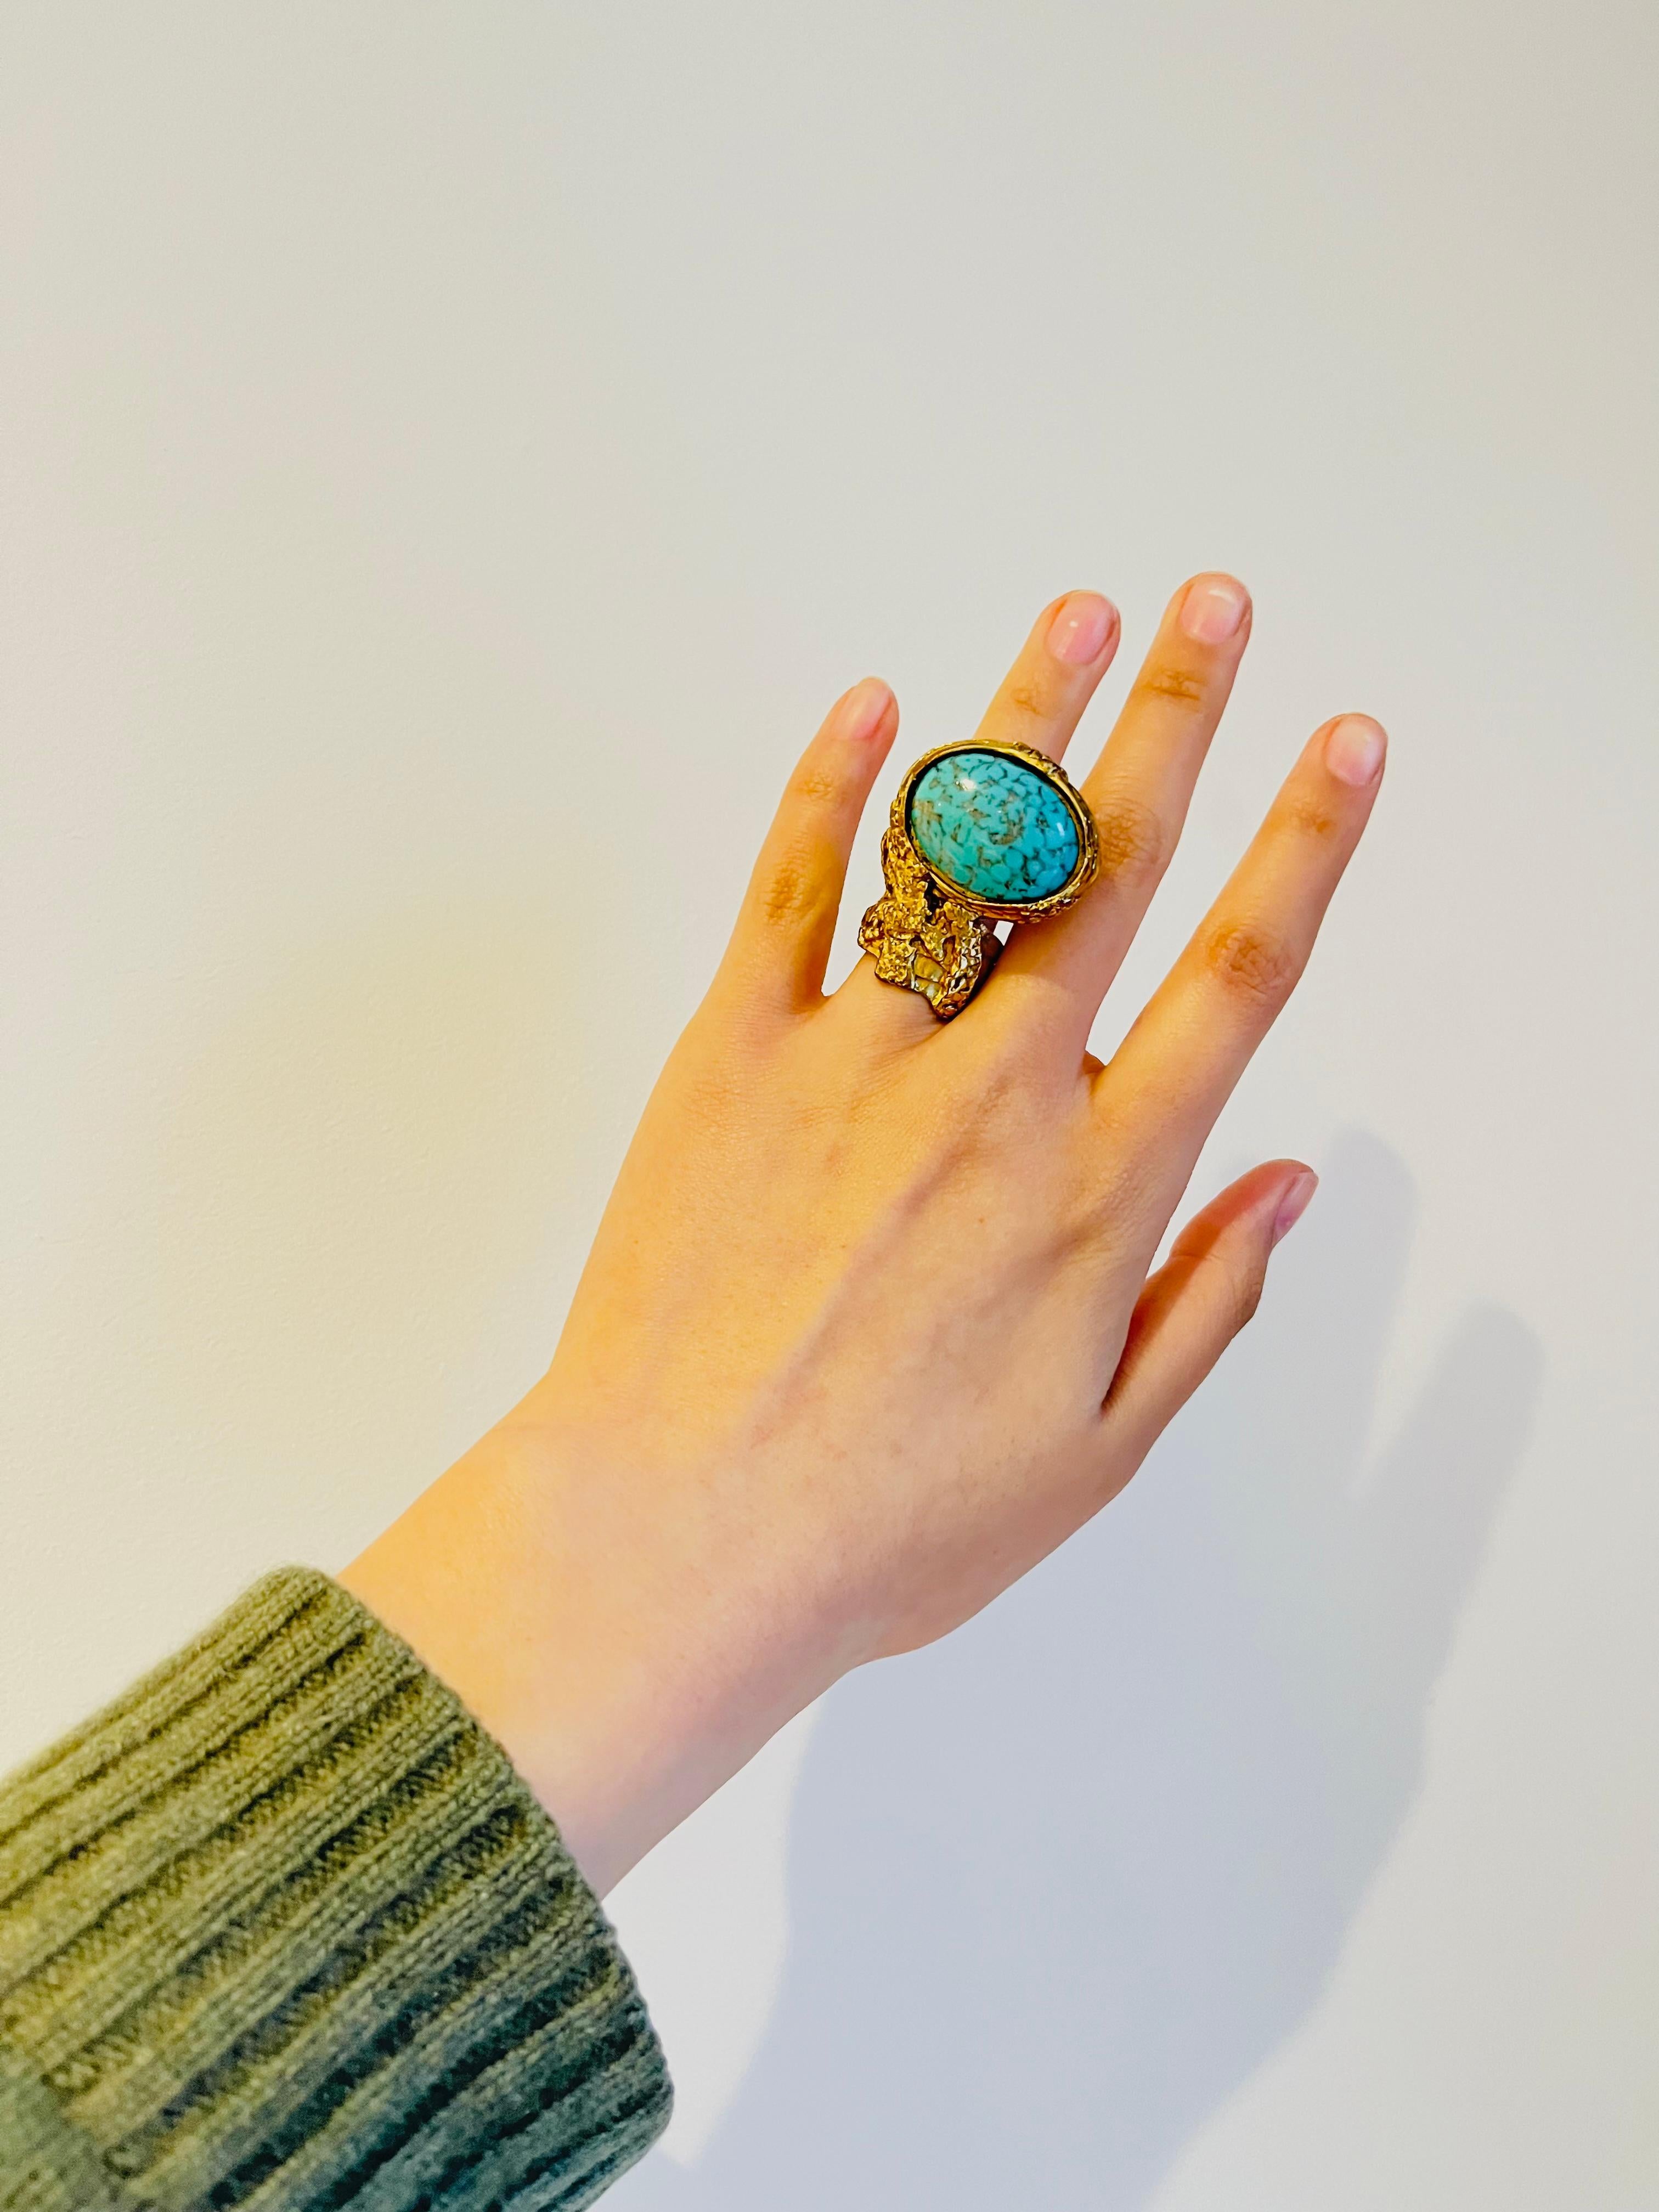 Yves Saint Laurent YSL Arty Turquoise Cabochon Statement Bague Chunky, Taille 6 en vente 1